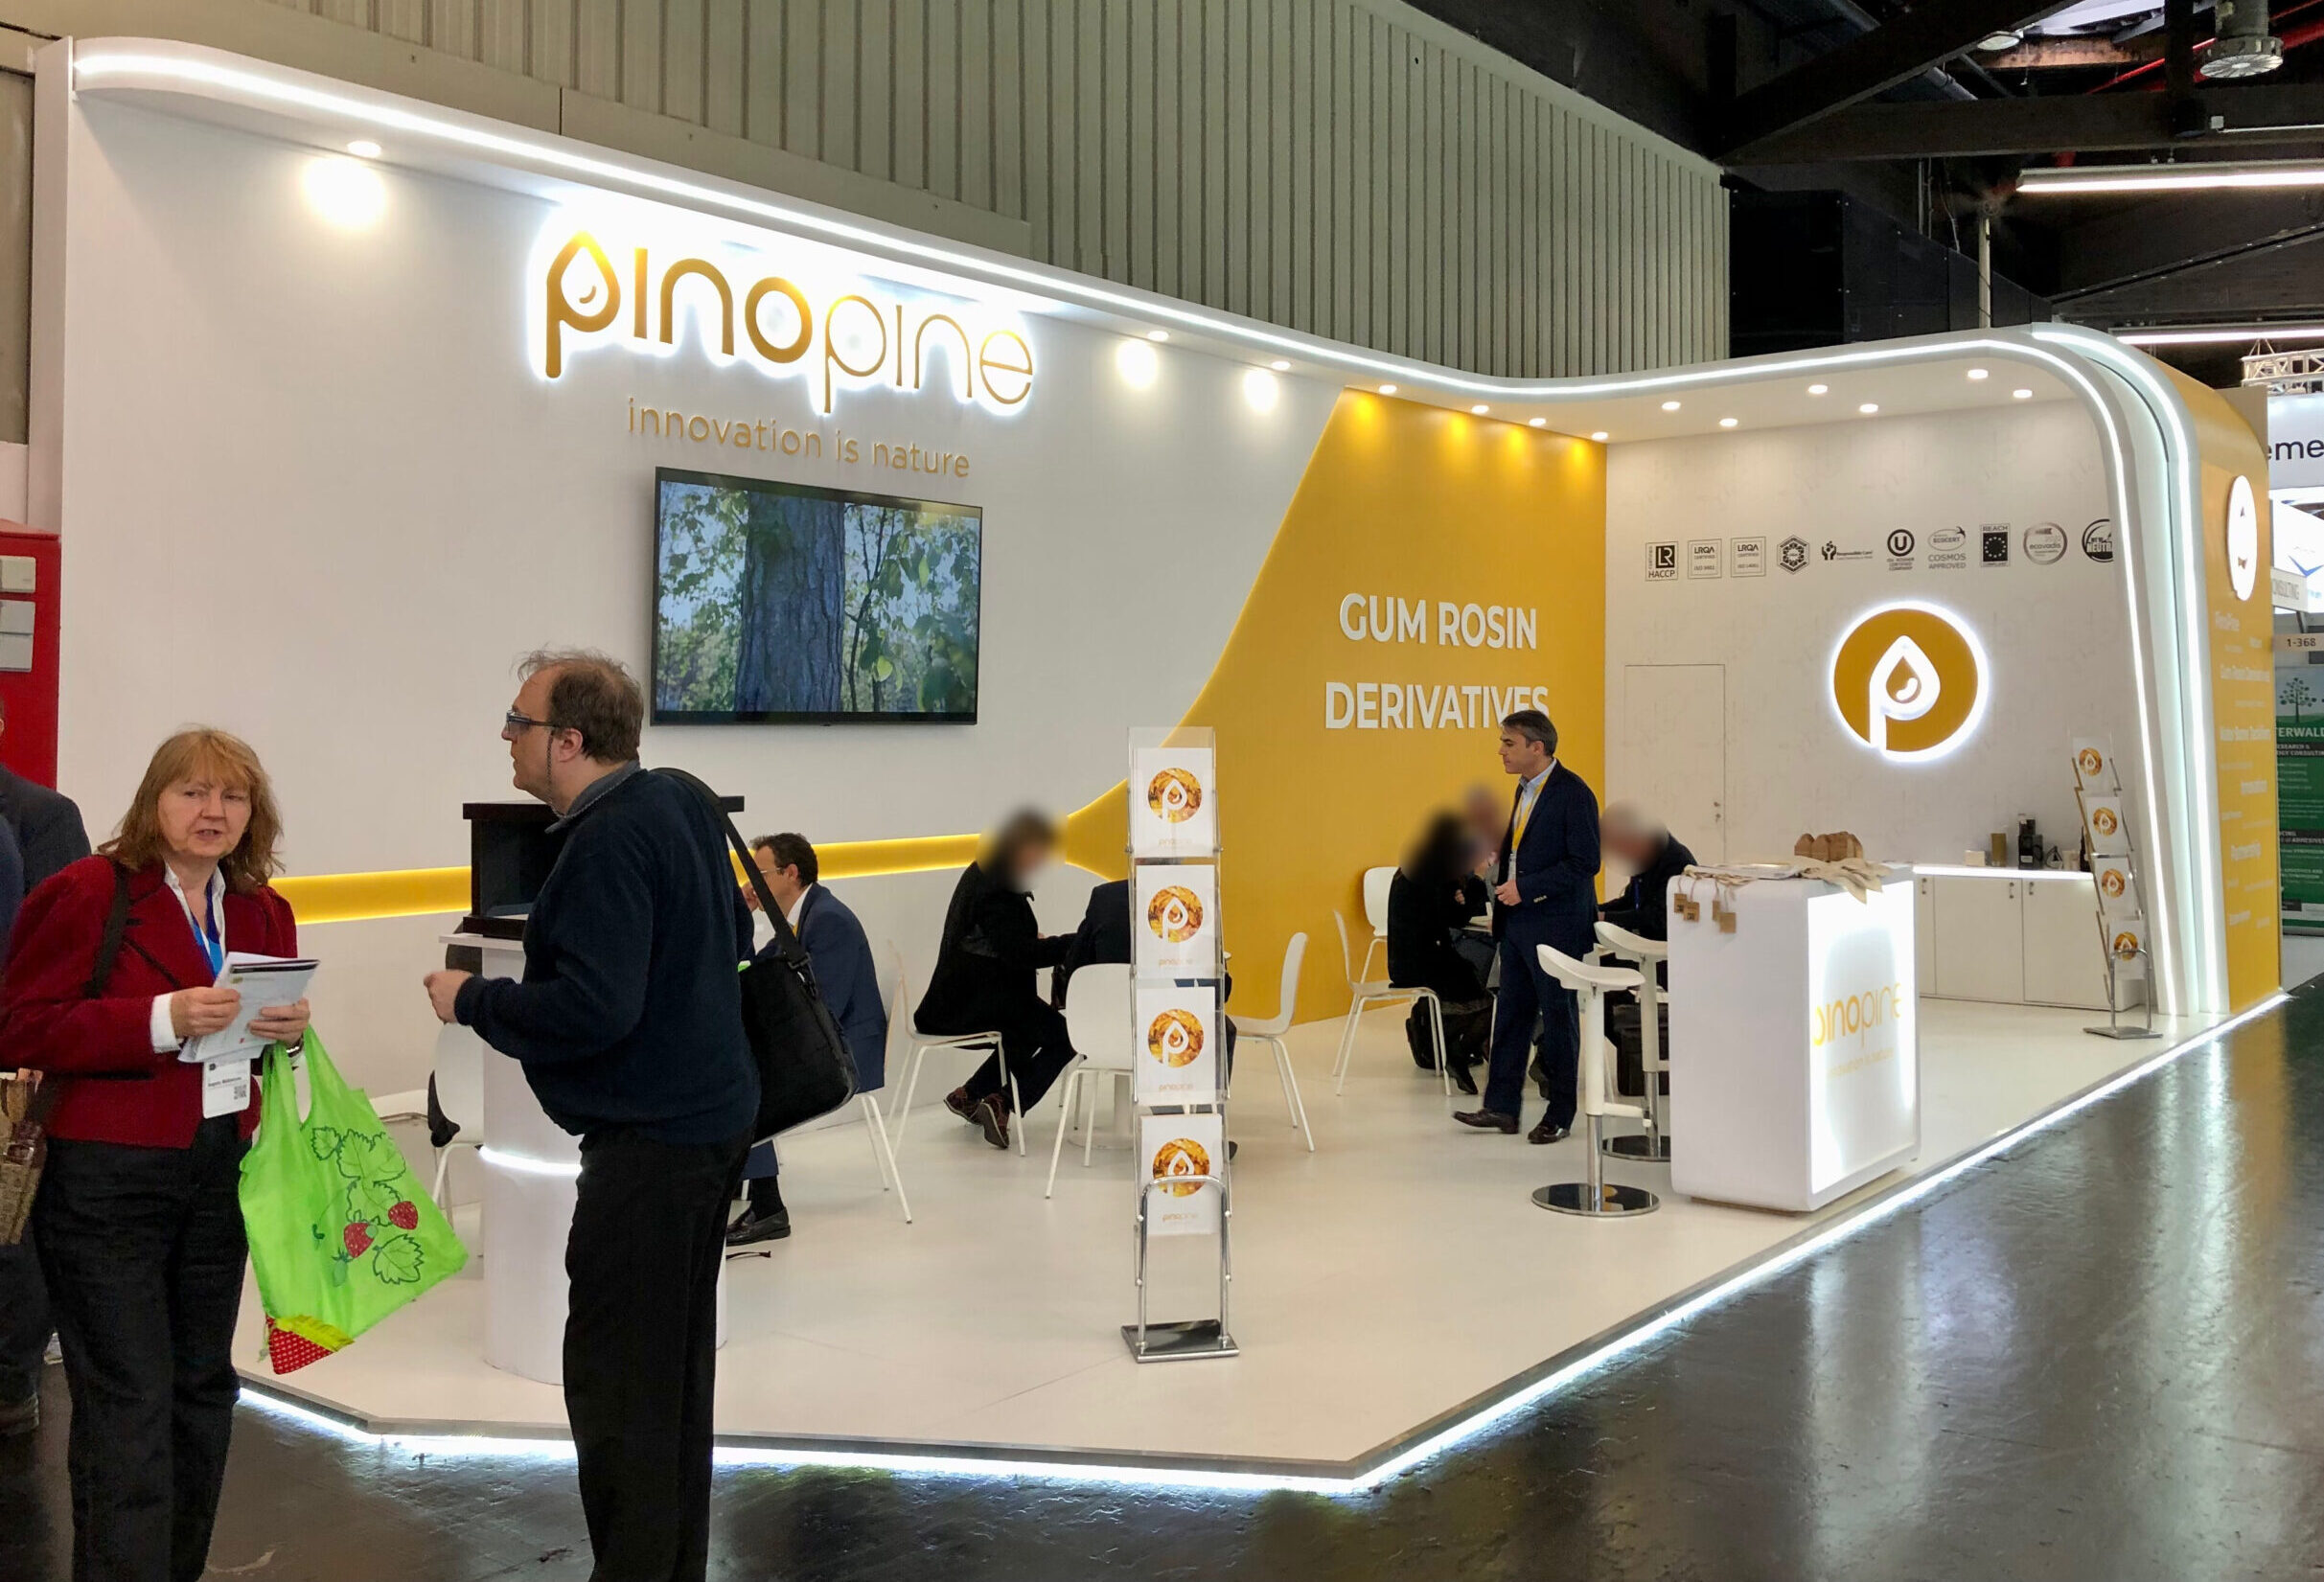 Pinopine stand at the European Coatings Show